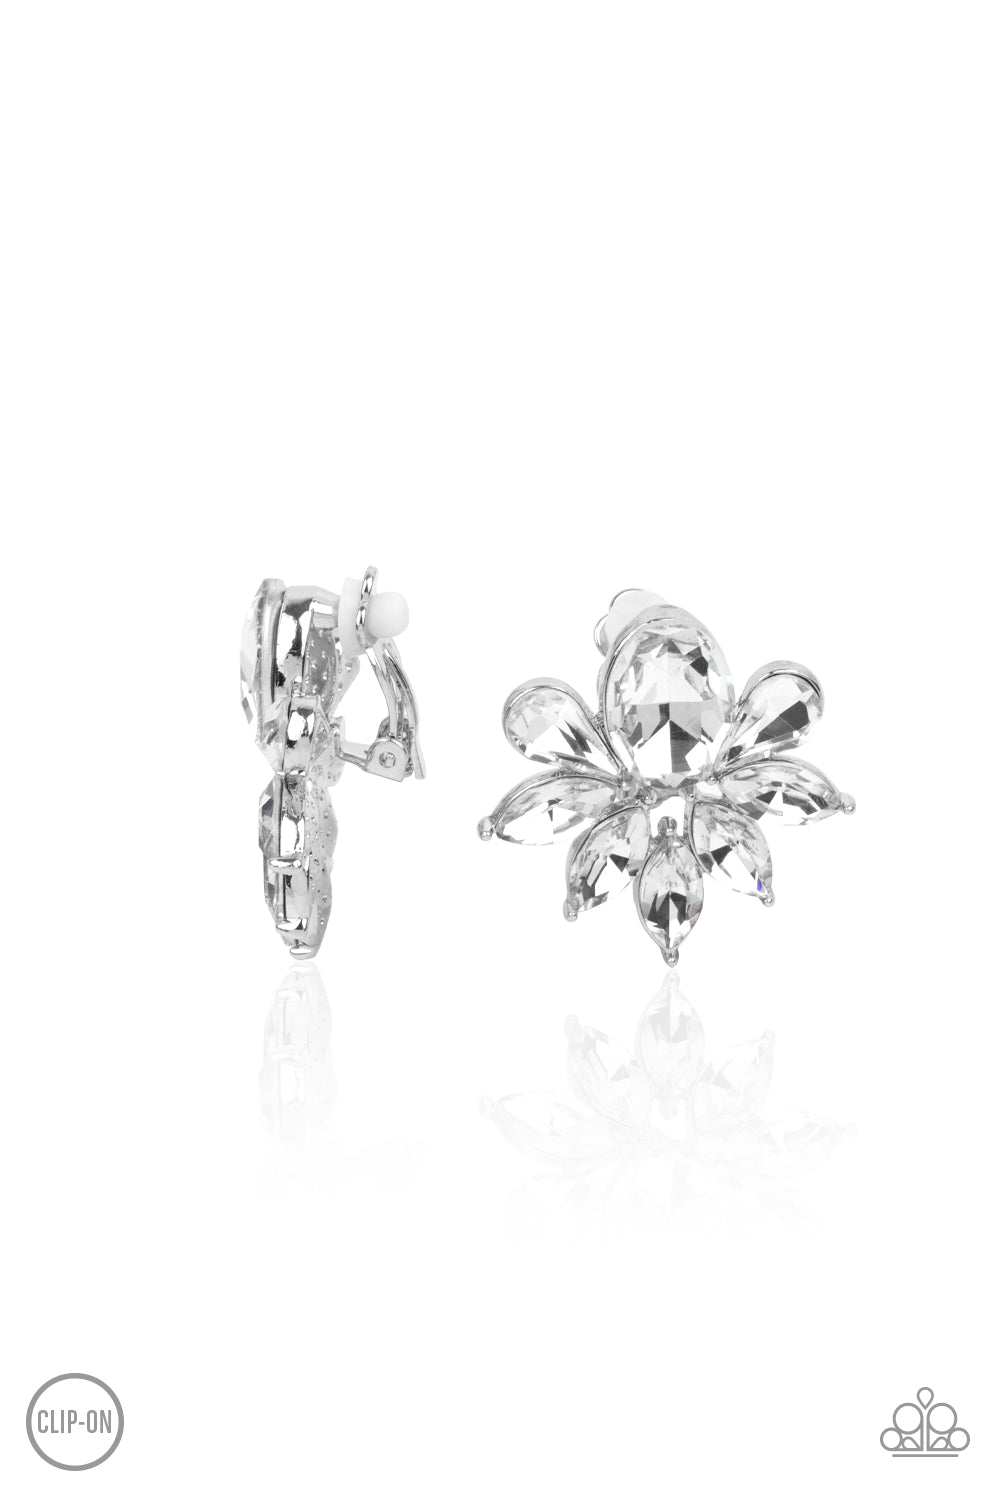 Paparazzi Fearless Finesse - White Clip-On Earrings - A Finishing Touch Jewelry